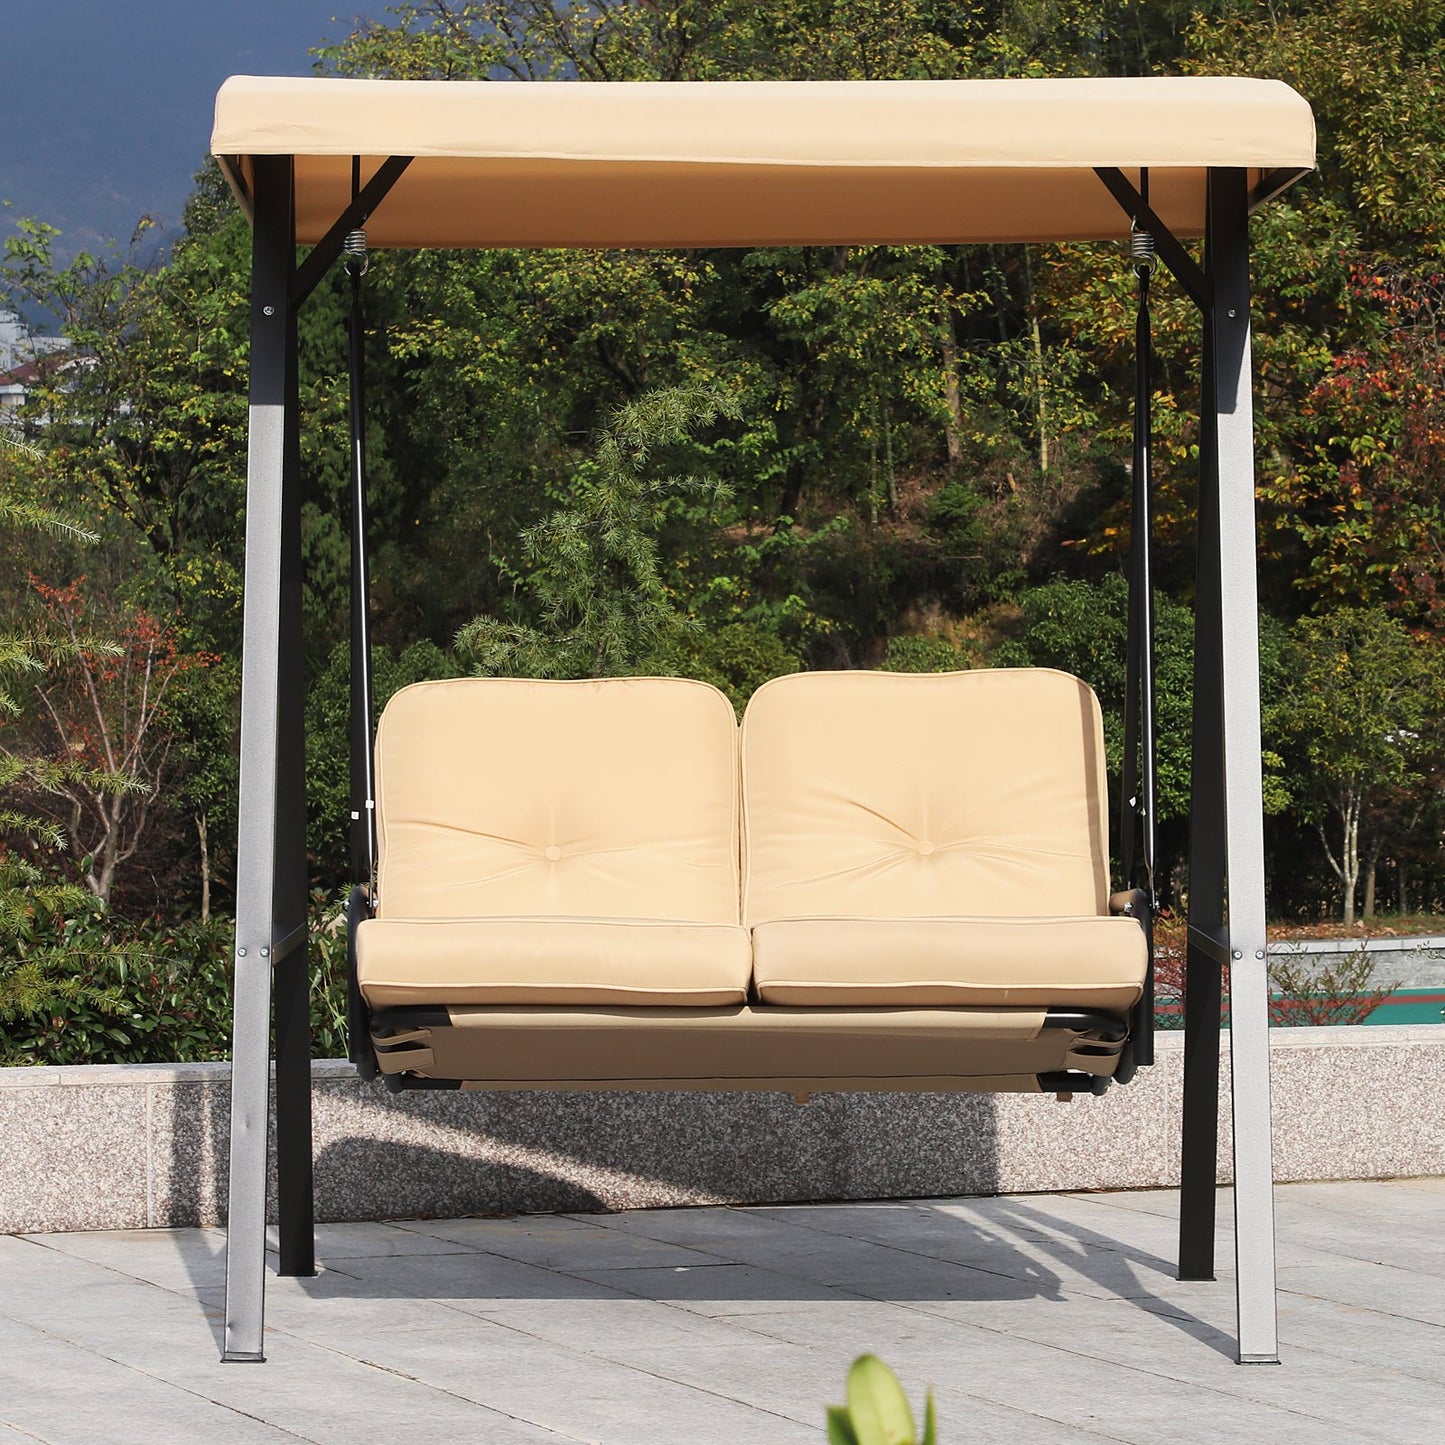 Outsunny 2-Seater Swing Chair Hammock Cushioned Bench Seat-Beige/Black